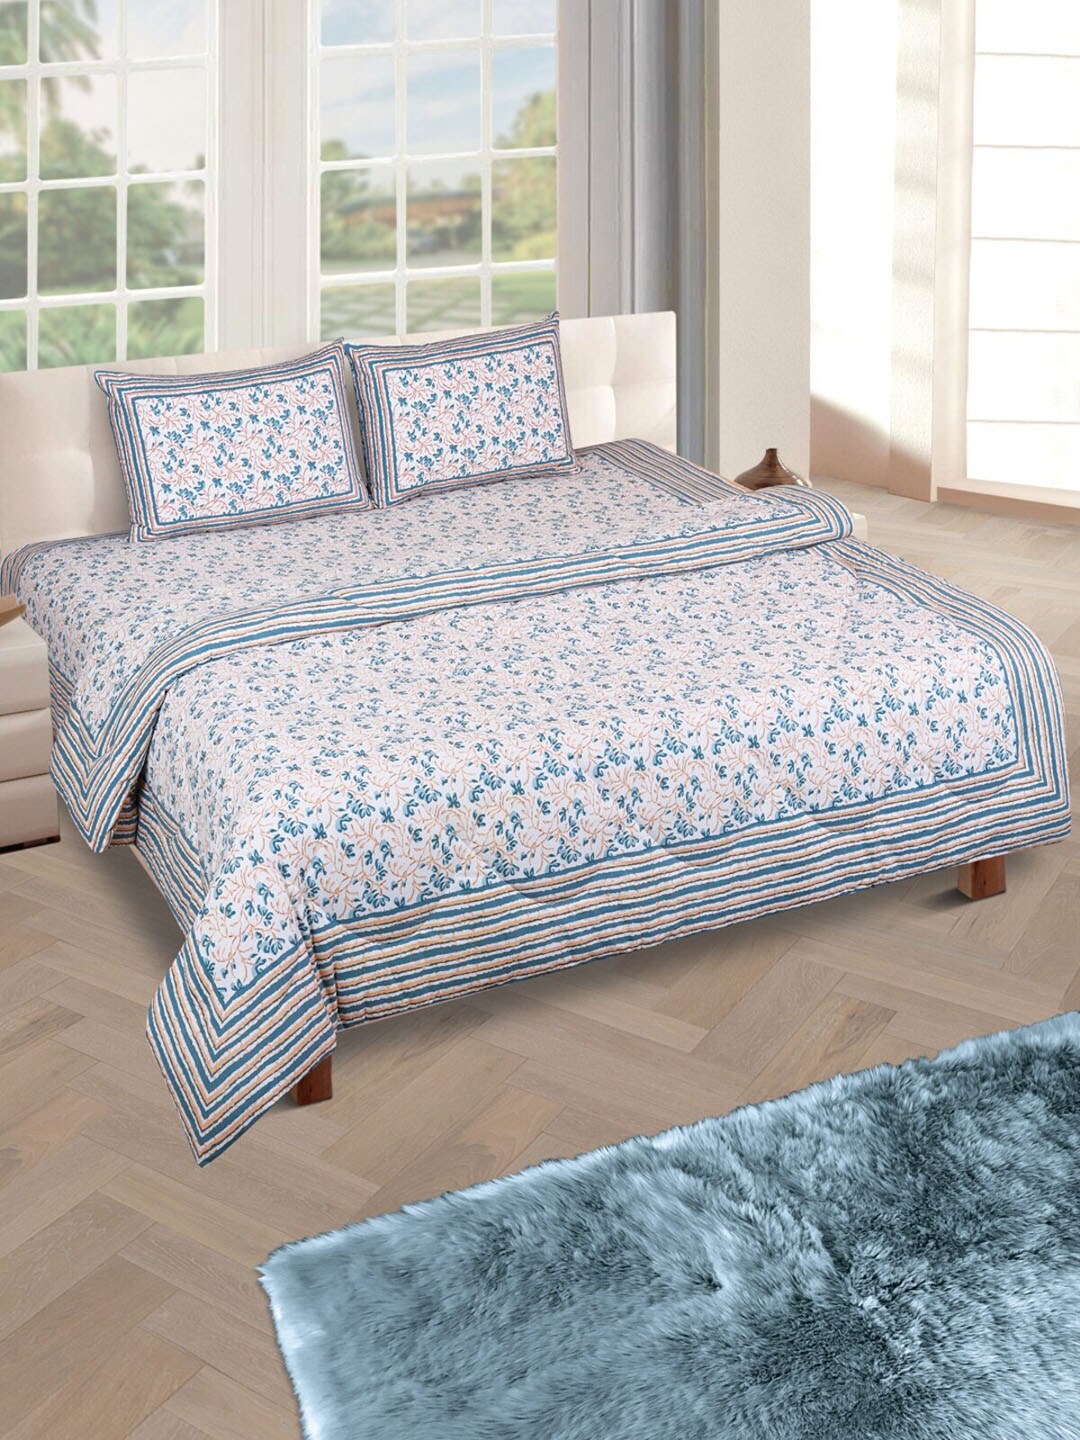 ROMEE Blue & Off-White Floral Printed Cotton Double King Bedding Set Price in India